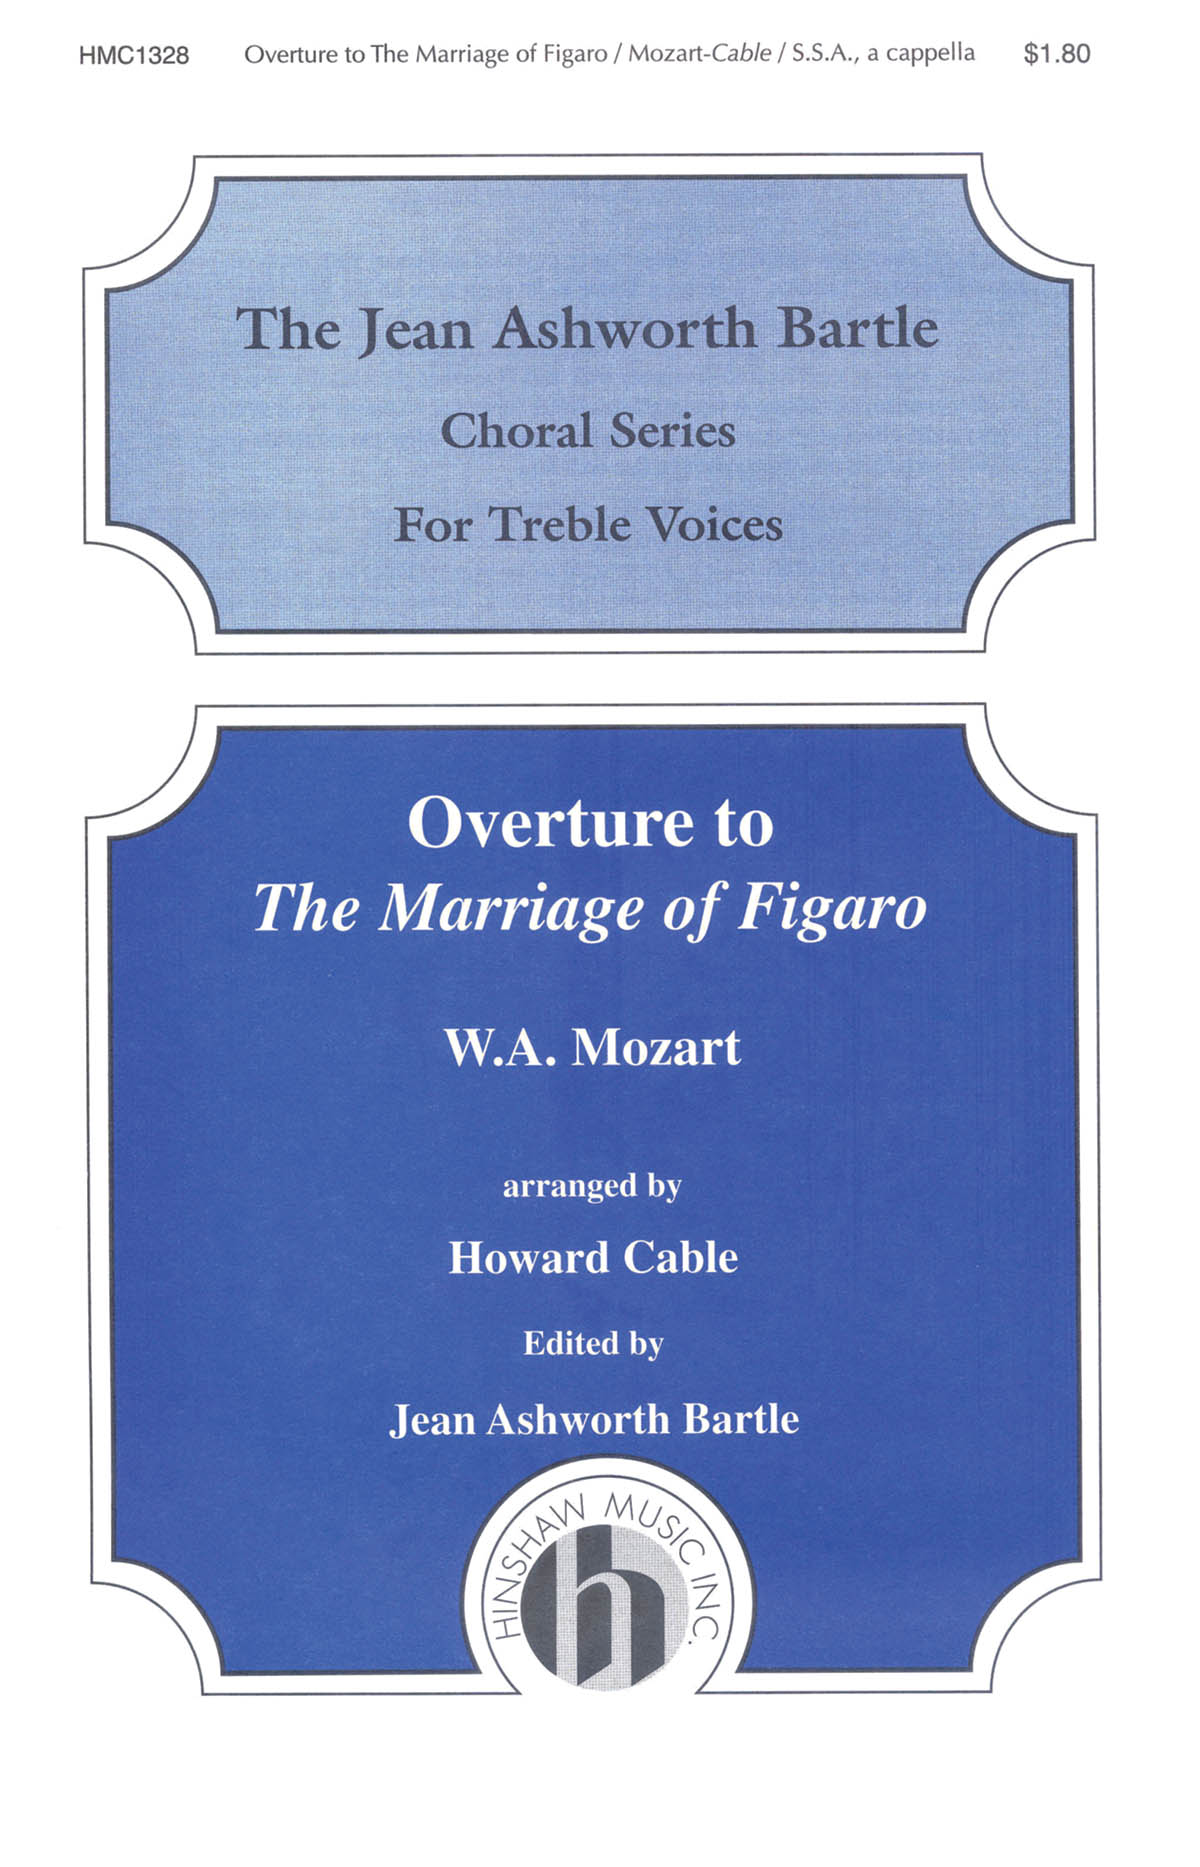 Wolfgang Amadeus Mozart: The Overture to the Marriage of Figaro: SSA: Vocal